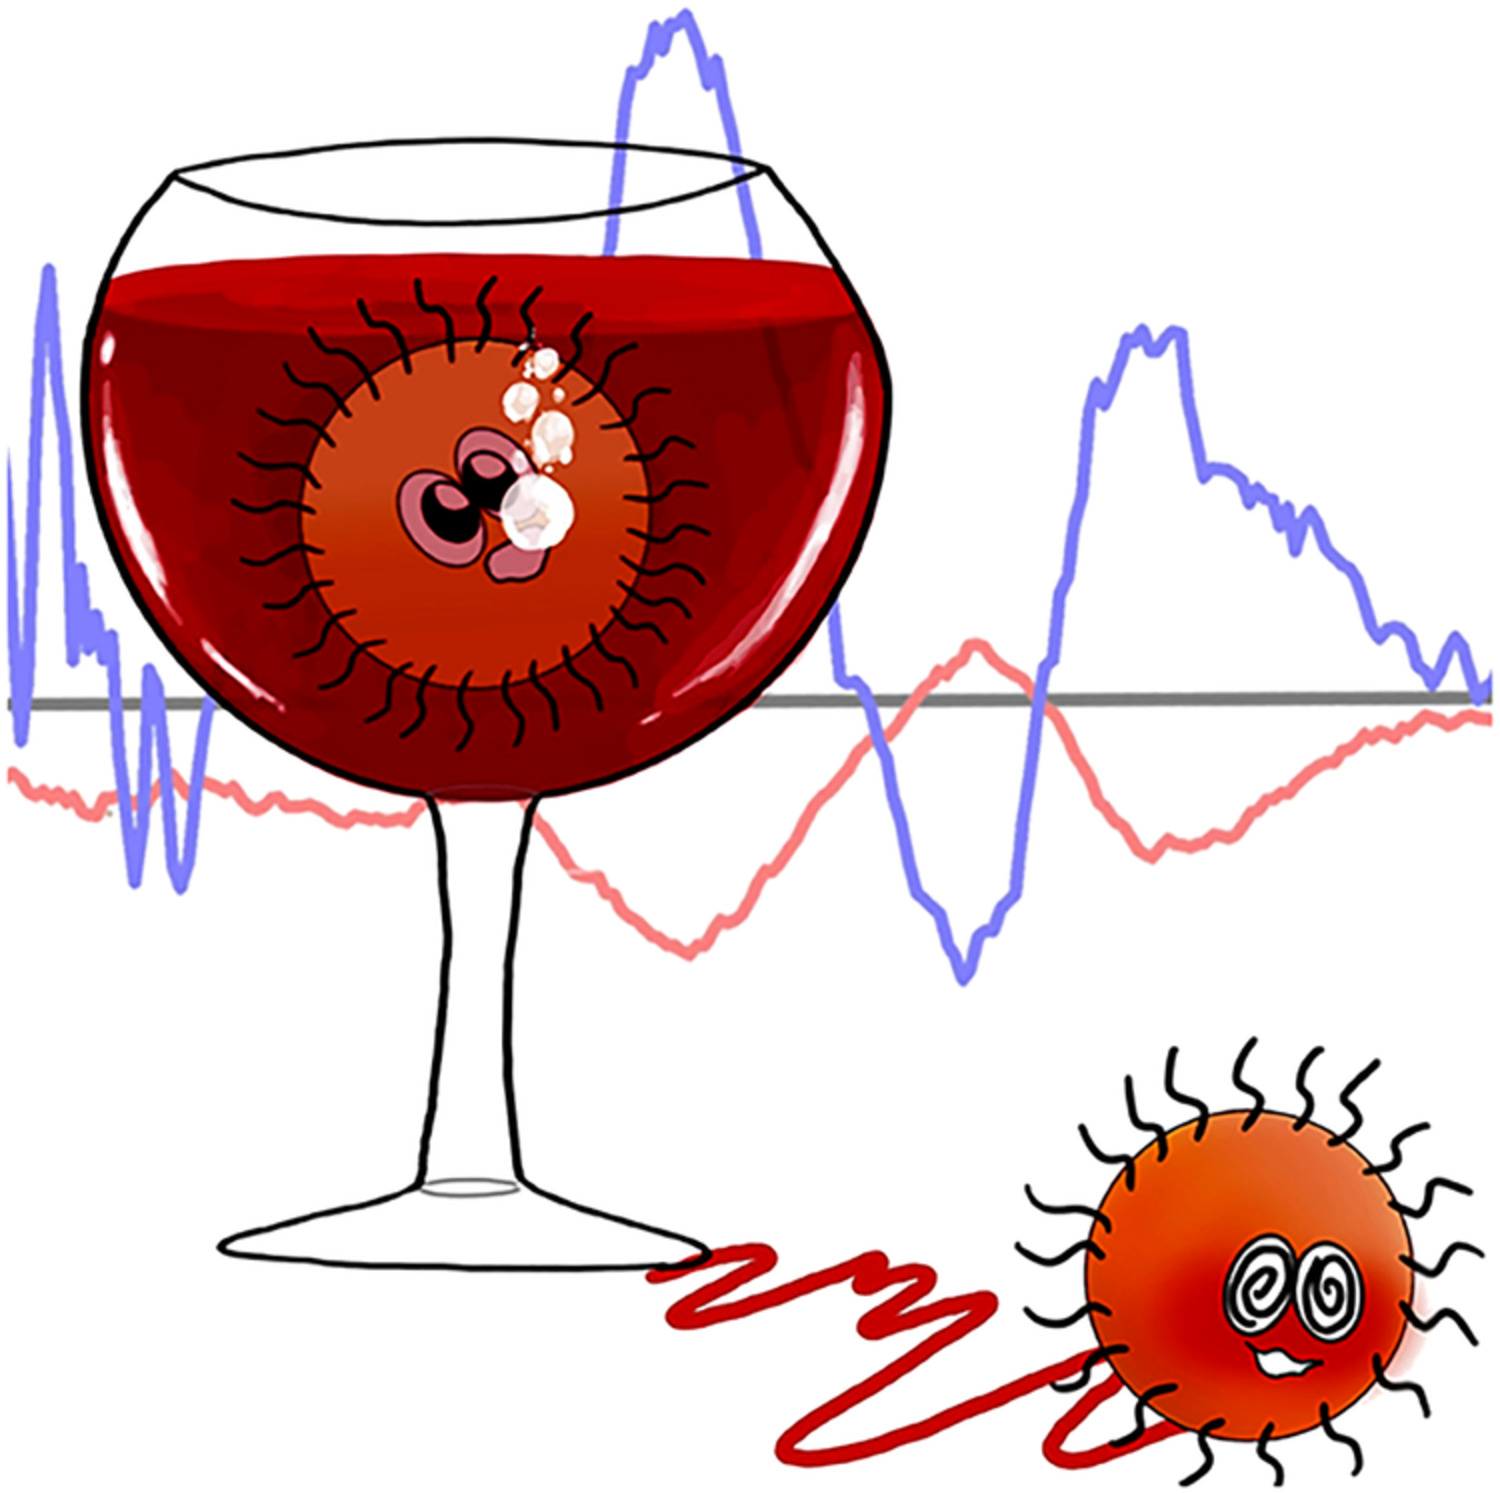 Apple juice and red wine induced mirror‐image circular dichroism in quantum dots